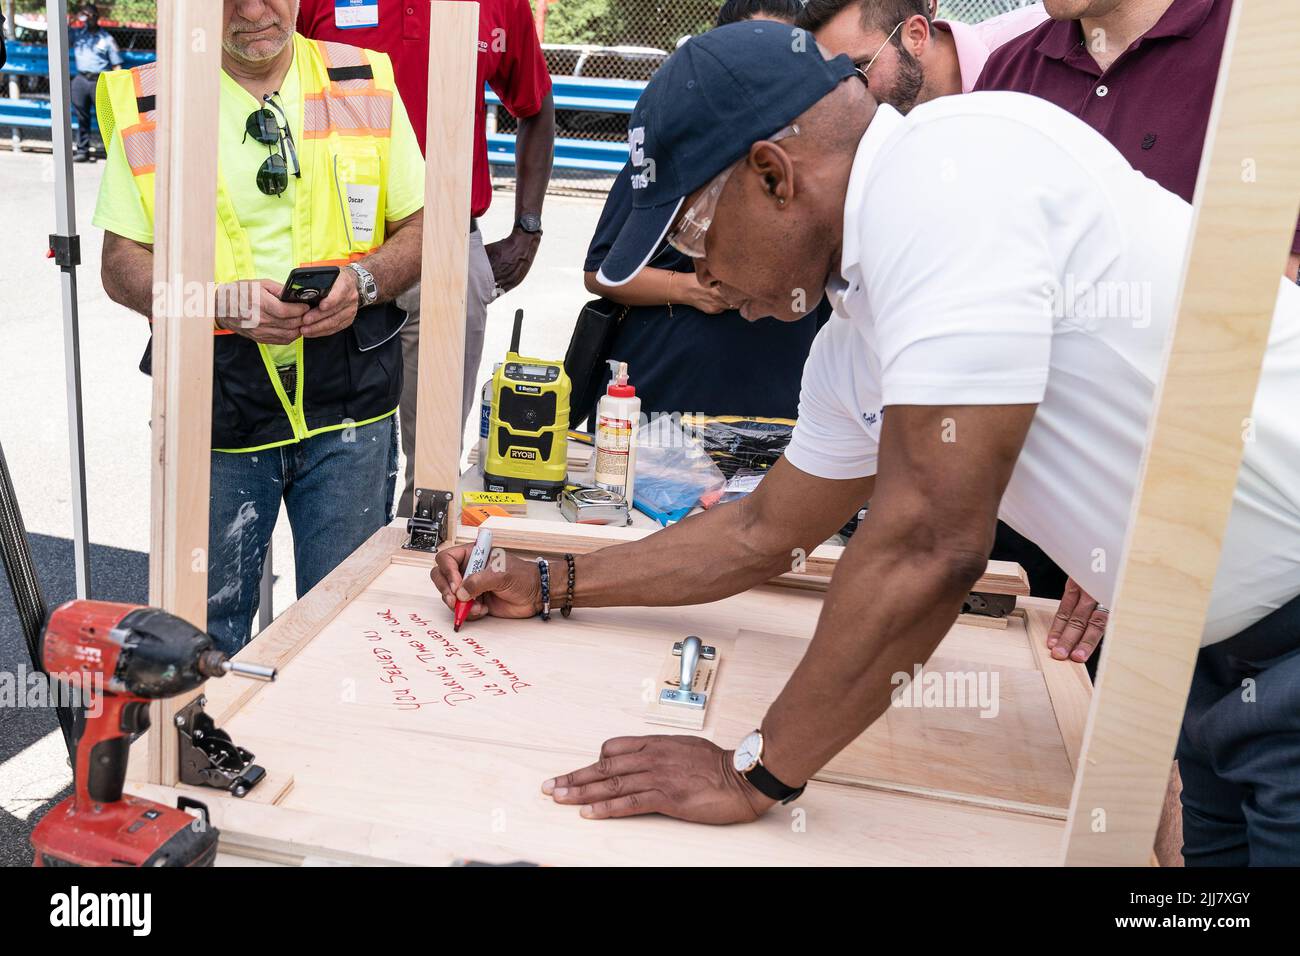 New York, USA. 23rd July, 2022. Mayor Eric Adams signed foldable table during DVS Furniture Build-a-Thon at JFK High School campus in New York on July 23, 2022. Furniture Build-a-Thon was organized by Fuller Center by volunteers to make foldable tables and stools for formerly homeless veterans who have recently moved into their new homes. (Photo by Lev Radin/Sipa USA) Credit: Sipa USA/Alamy Live News Stock Photo